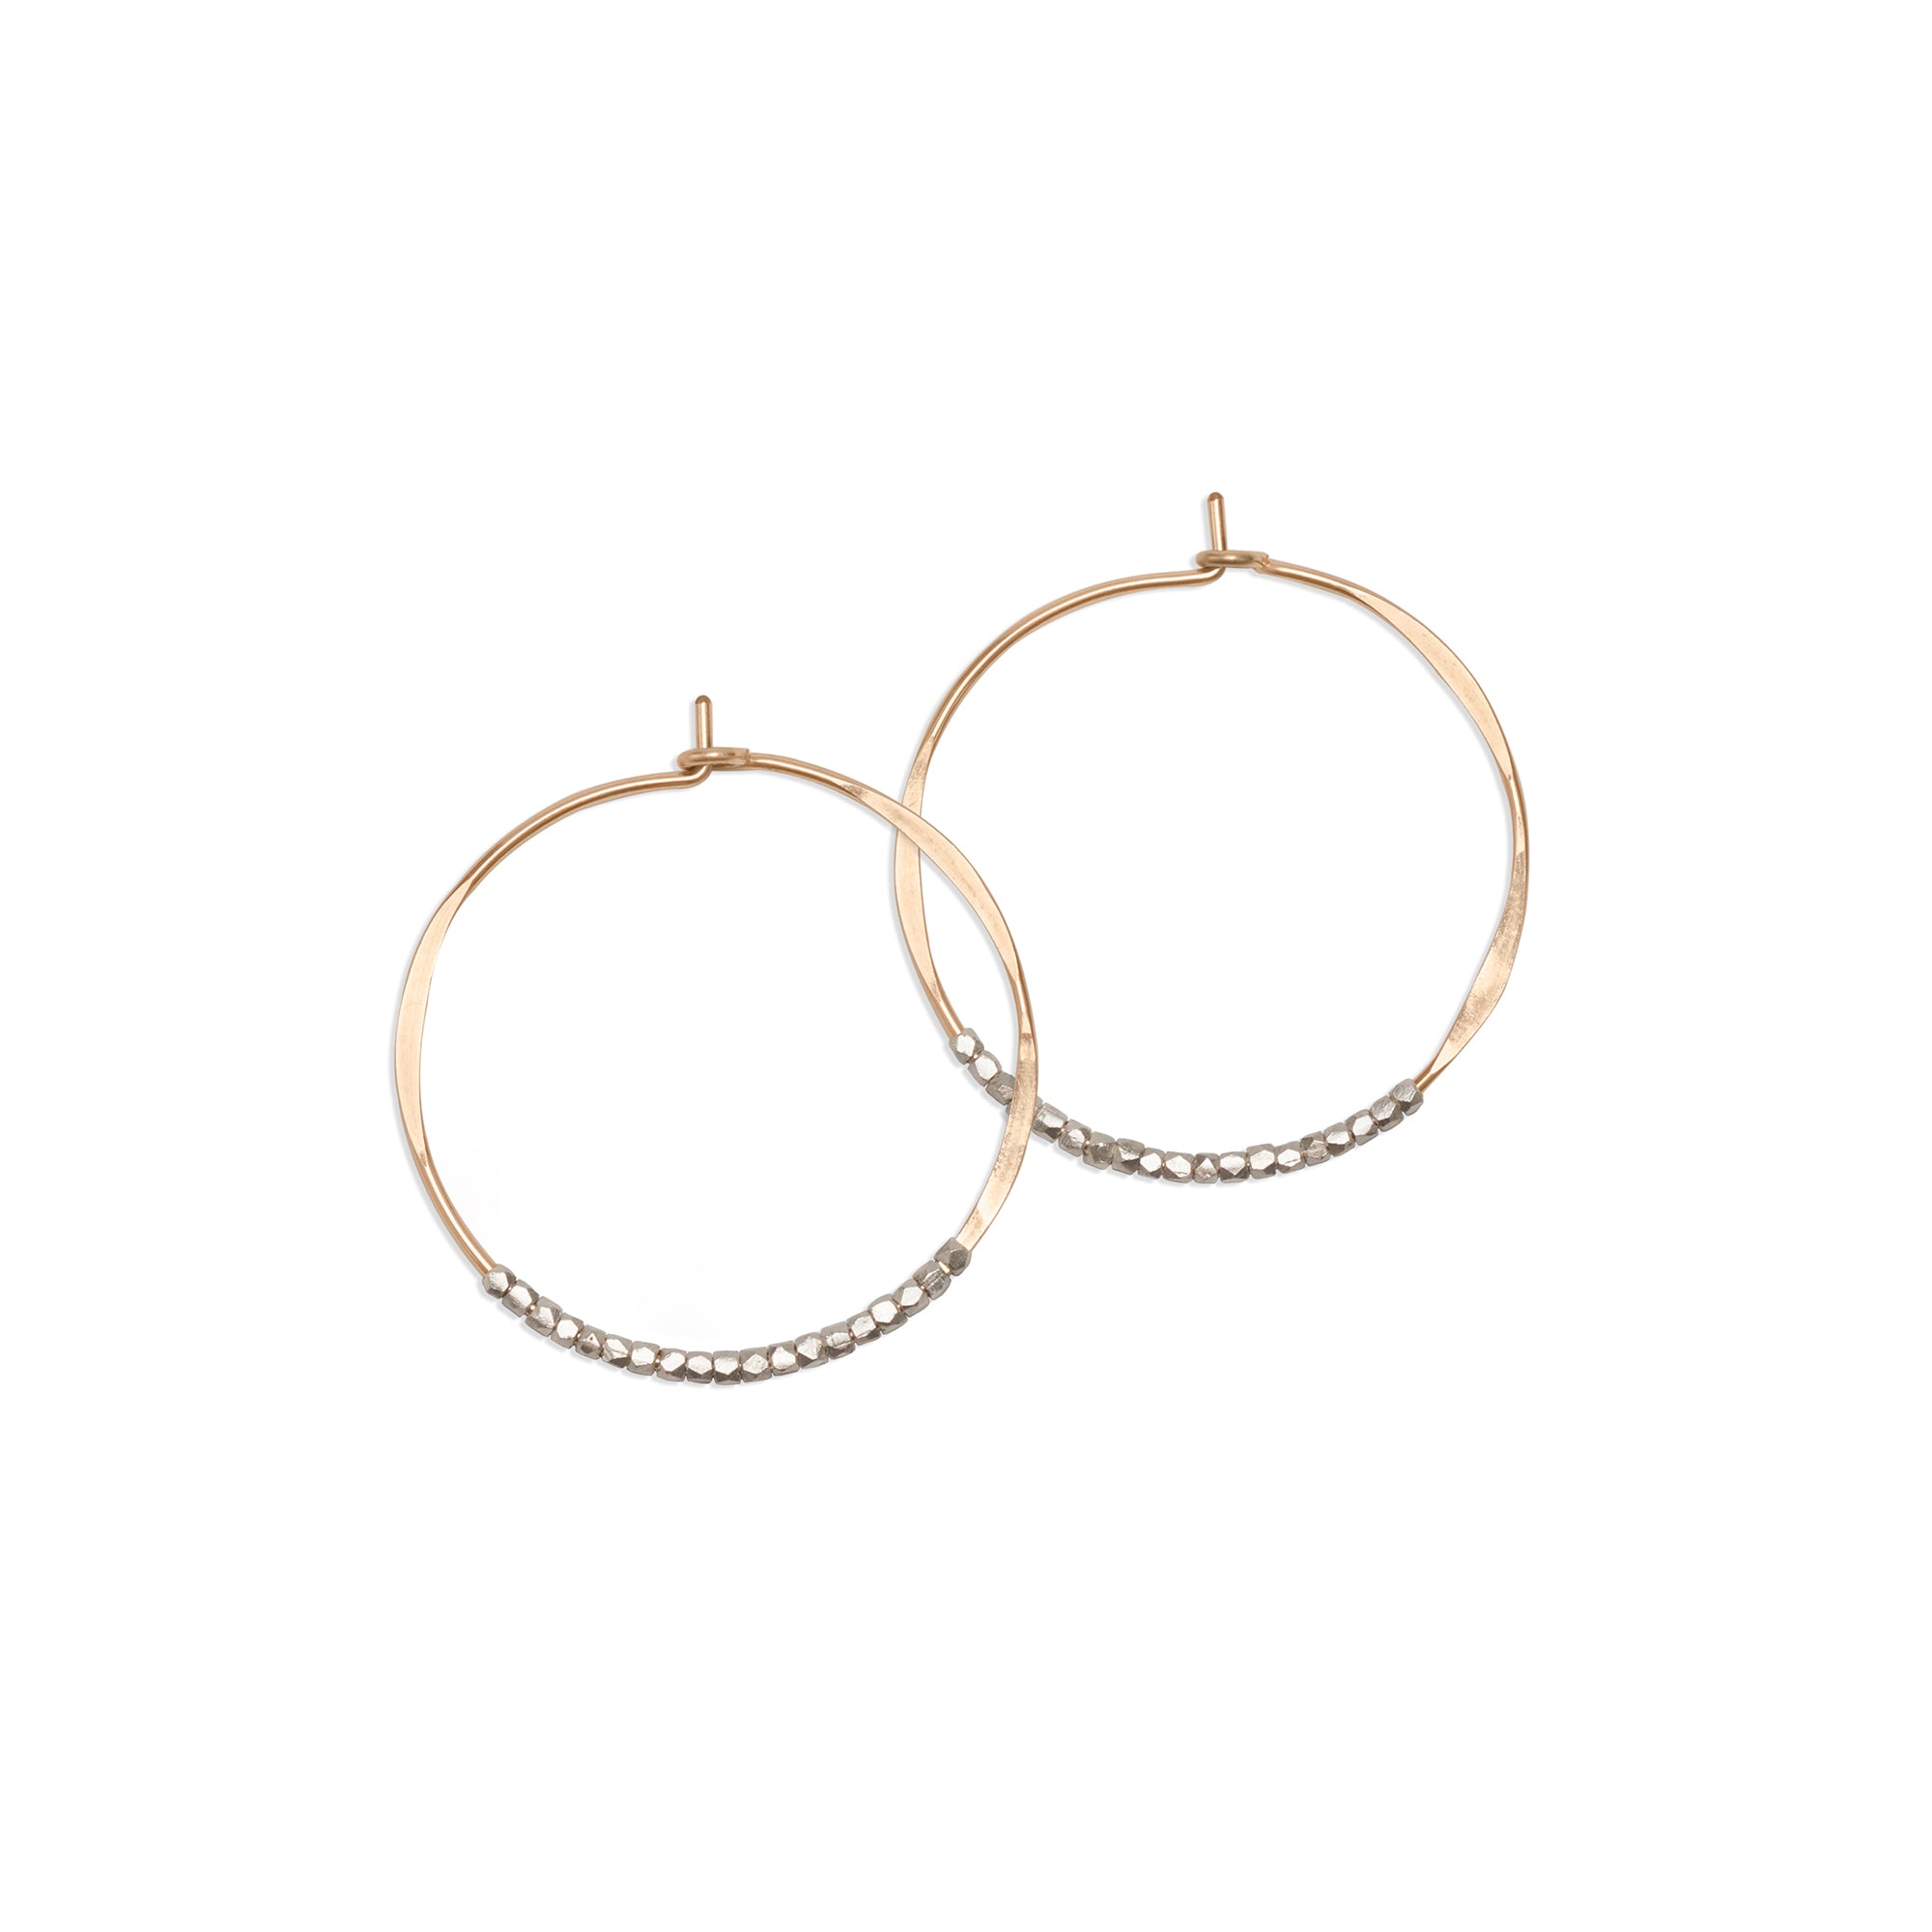 These Bead Hoop Earrings are embellished with delicate sterling silver beads, making them effortless and eye catching